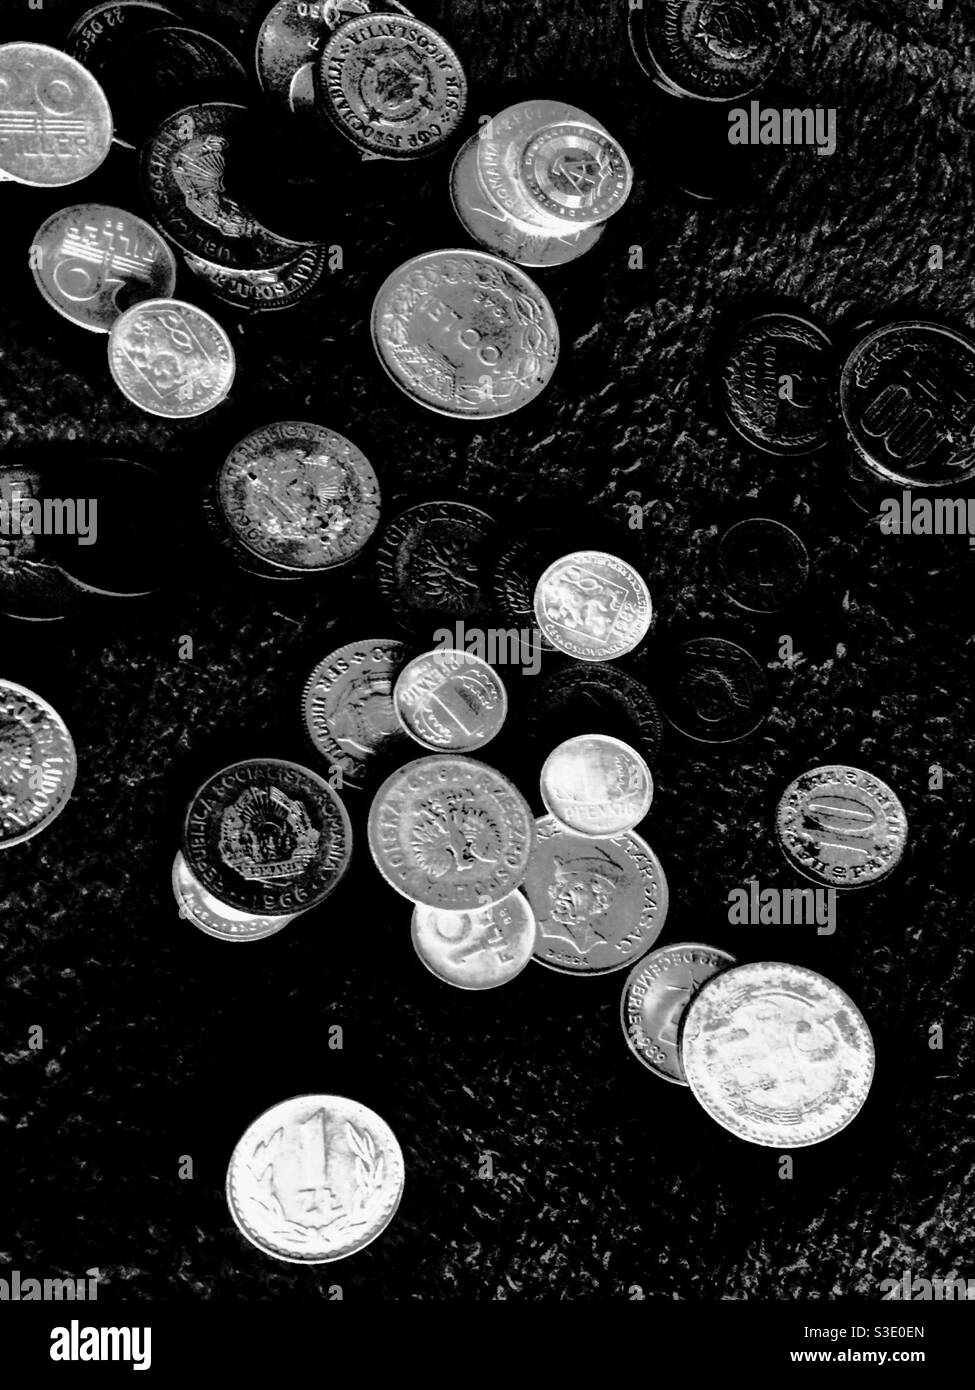 Coins from all over the world Stock Photo